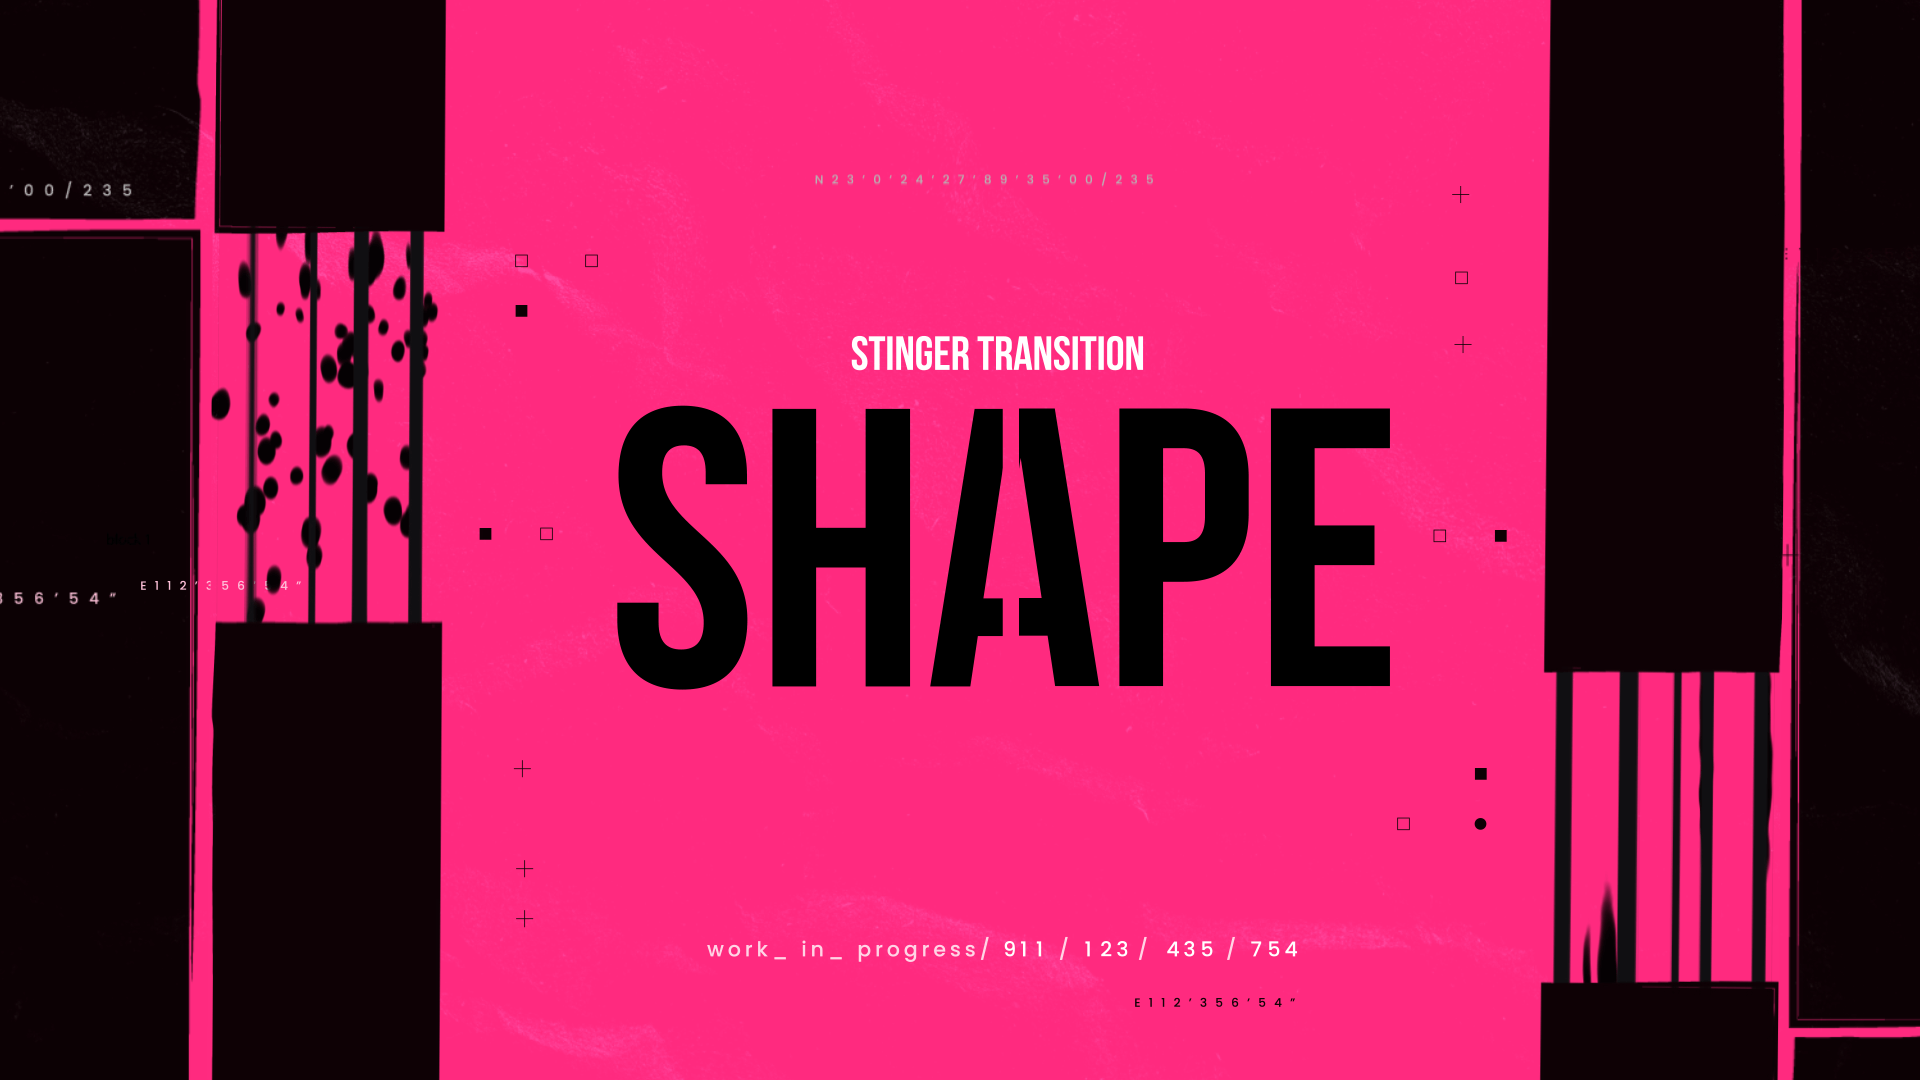 Shape - Stinger Transition for Twitch, Youtube and Facebook